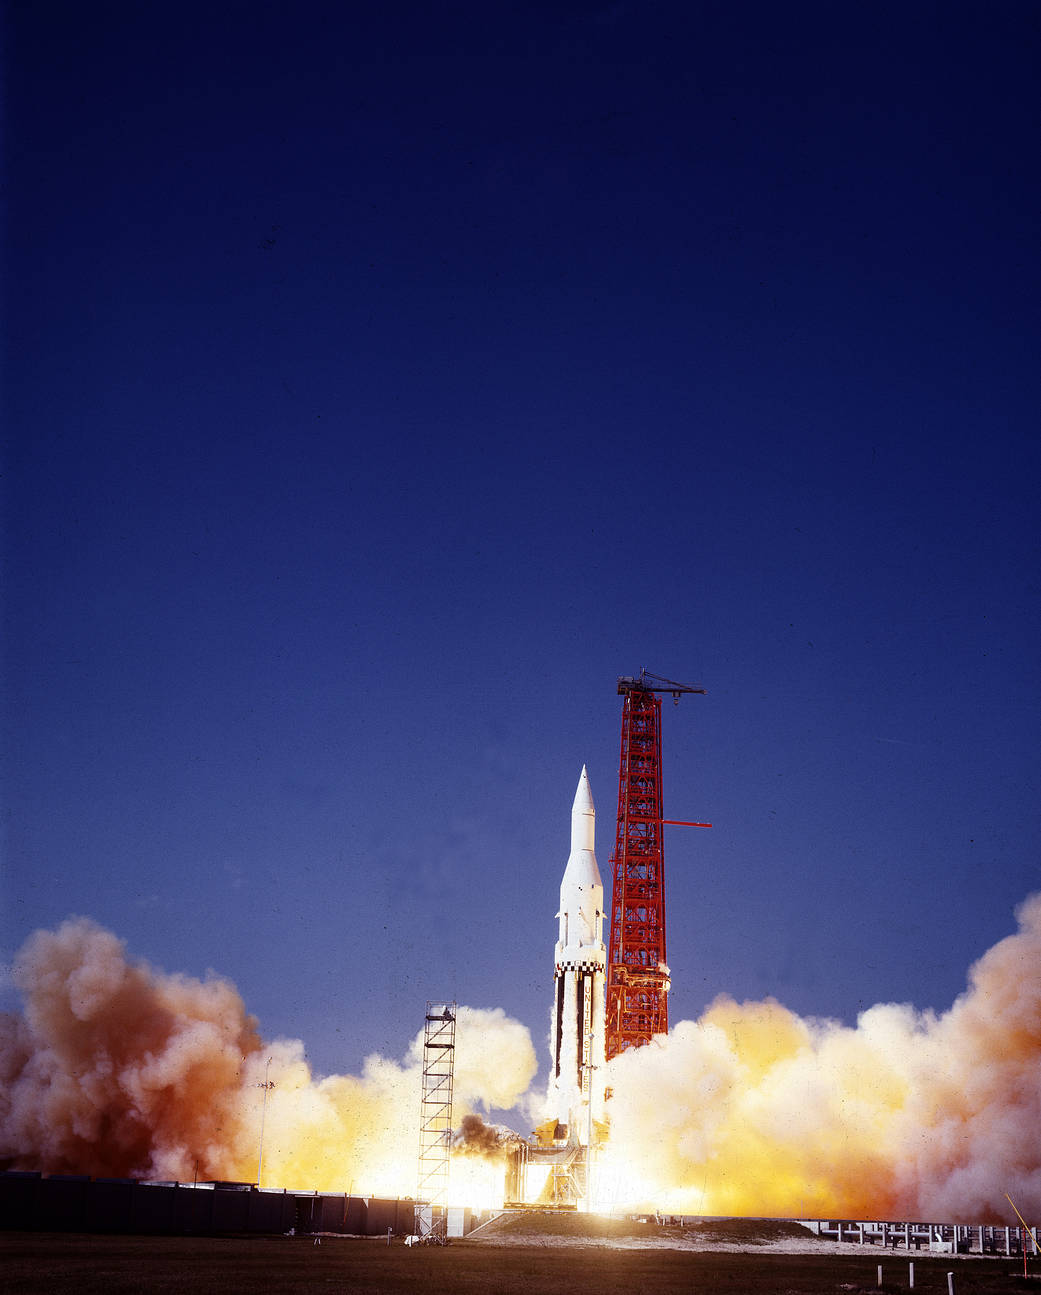 This week in 1963, the Saturn I SA-4 rocket launched from NASA’s Kennedy Space Center. 